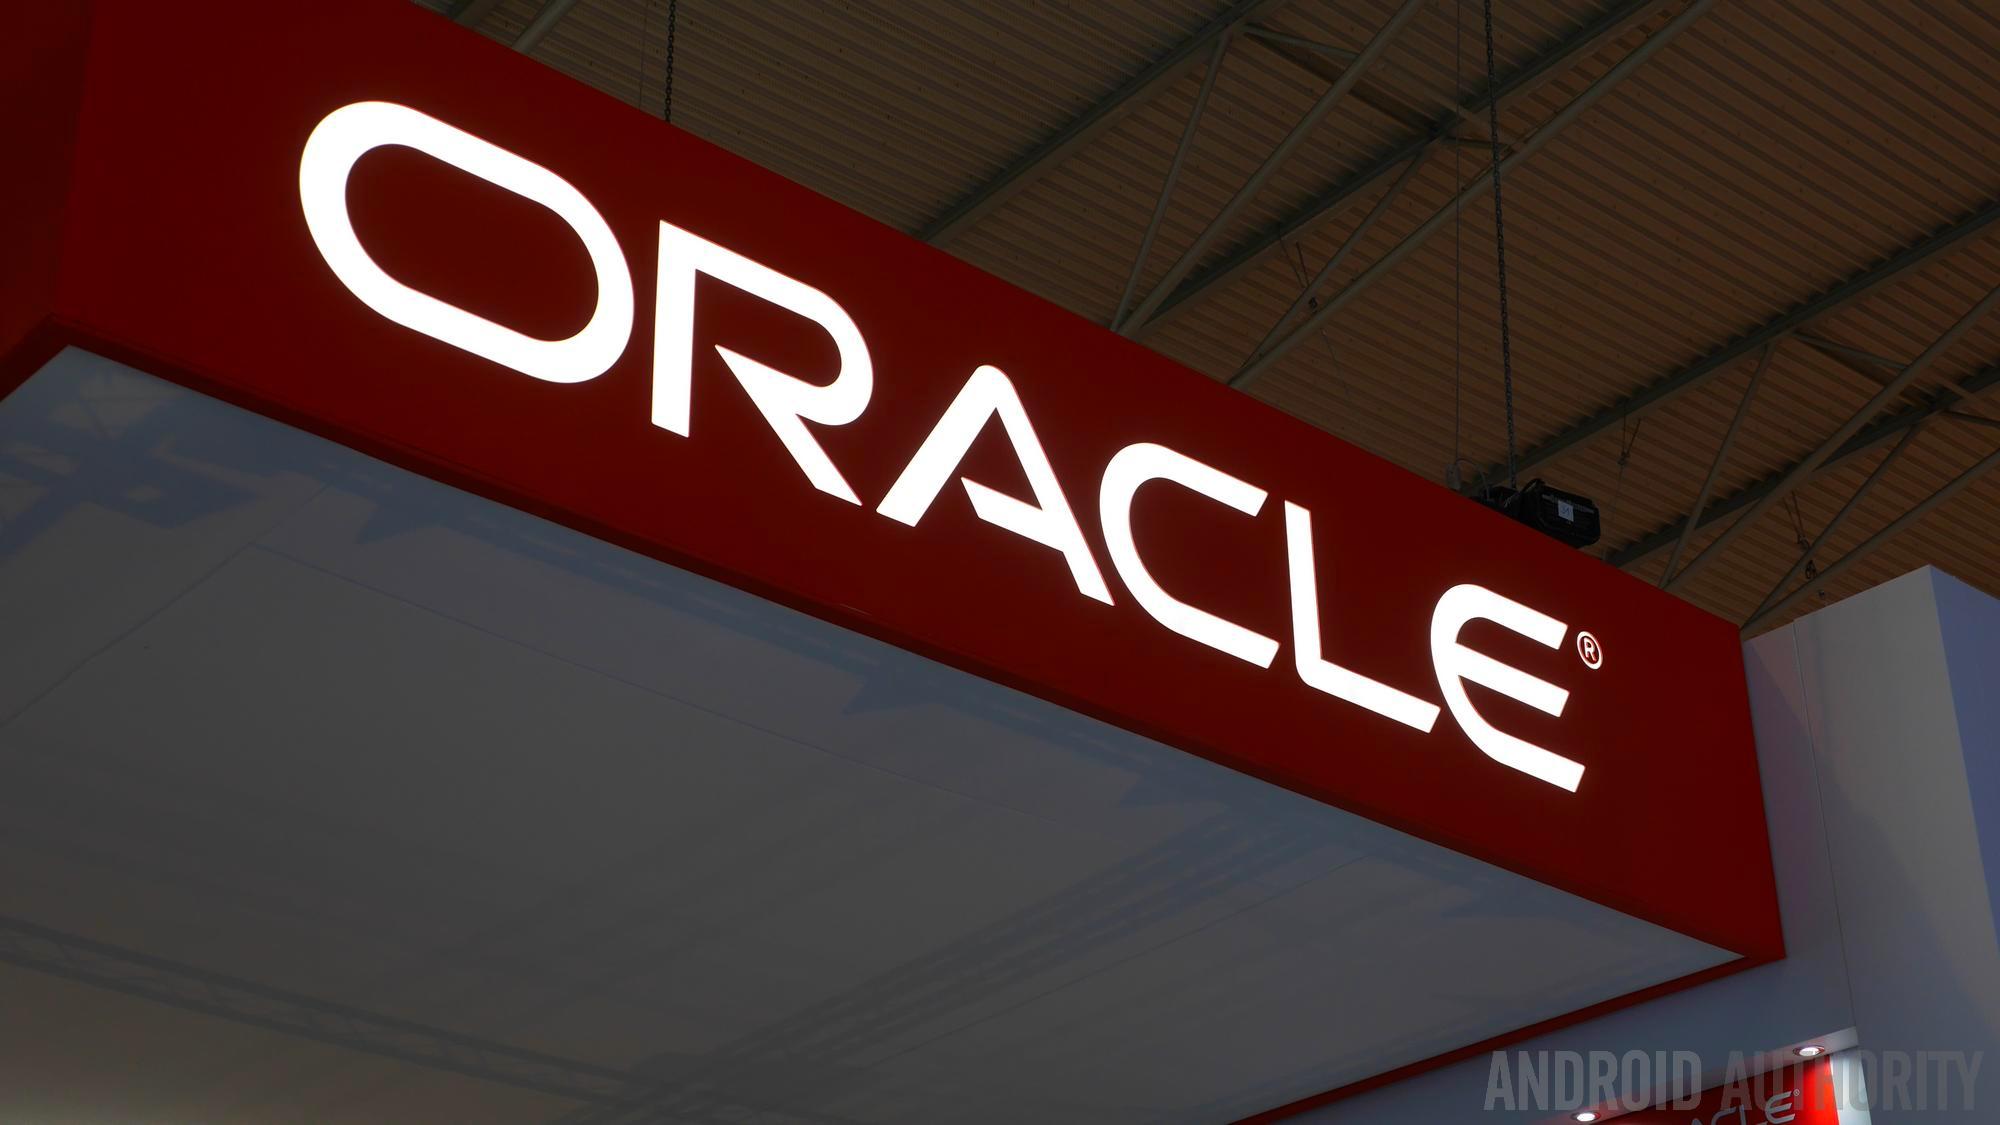 oracle logo mwc 2015